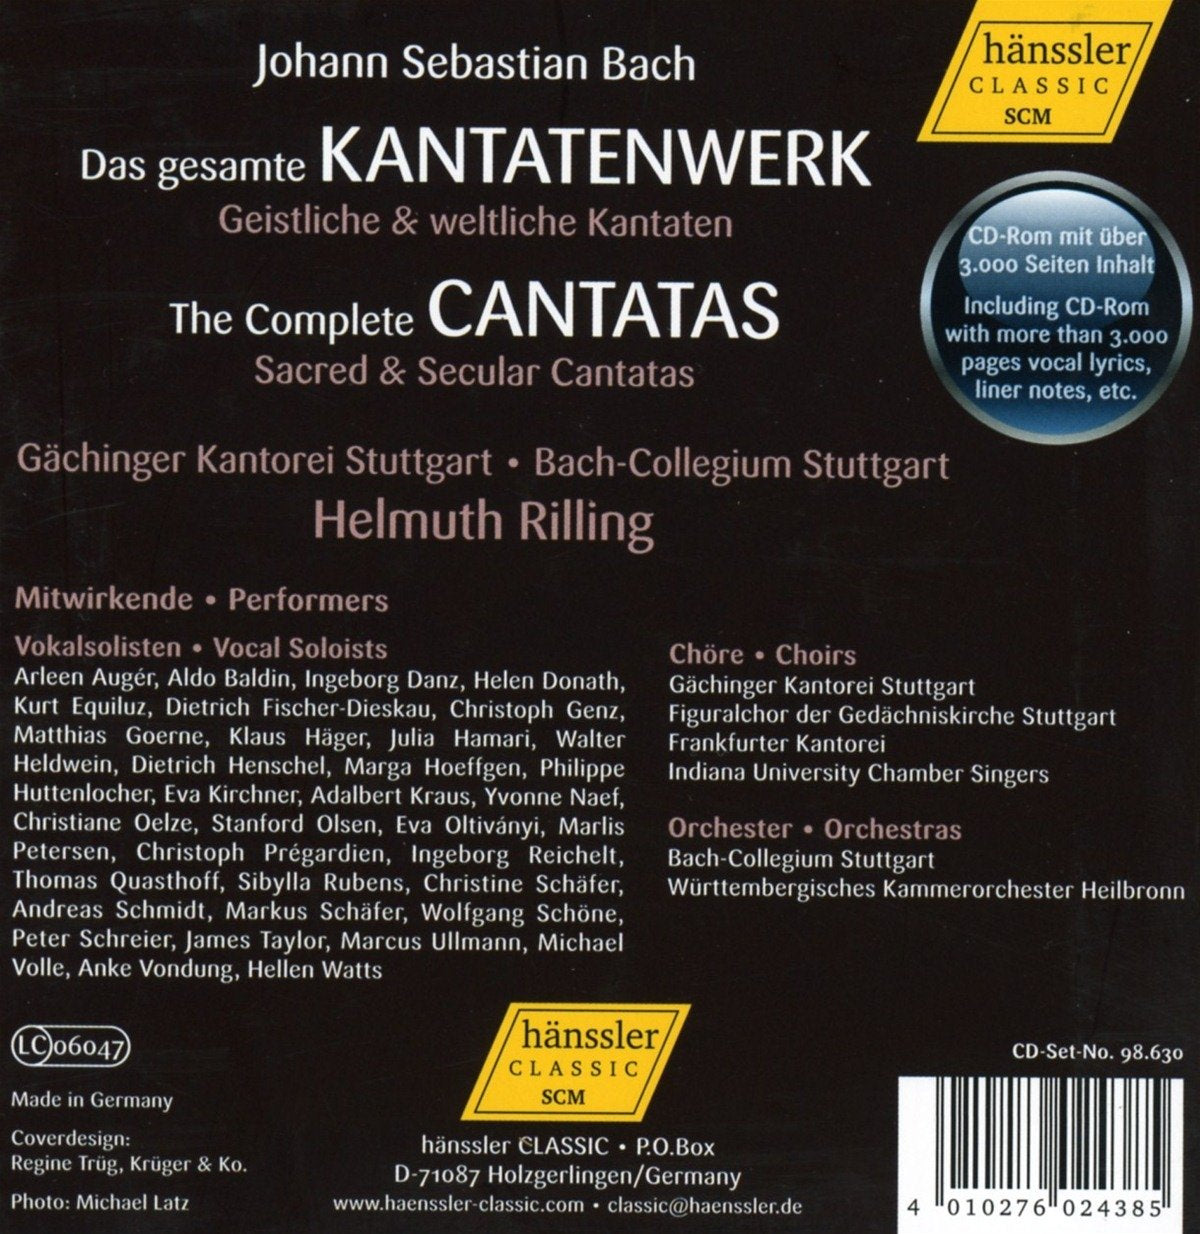 BACH: THE COMPLETE CANTATAS - RILLING (73 CDS, 2 BOOKLETS, 1 CD-ROM)